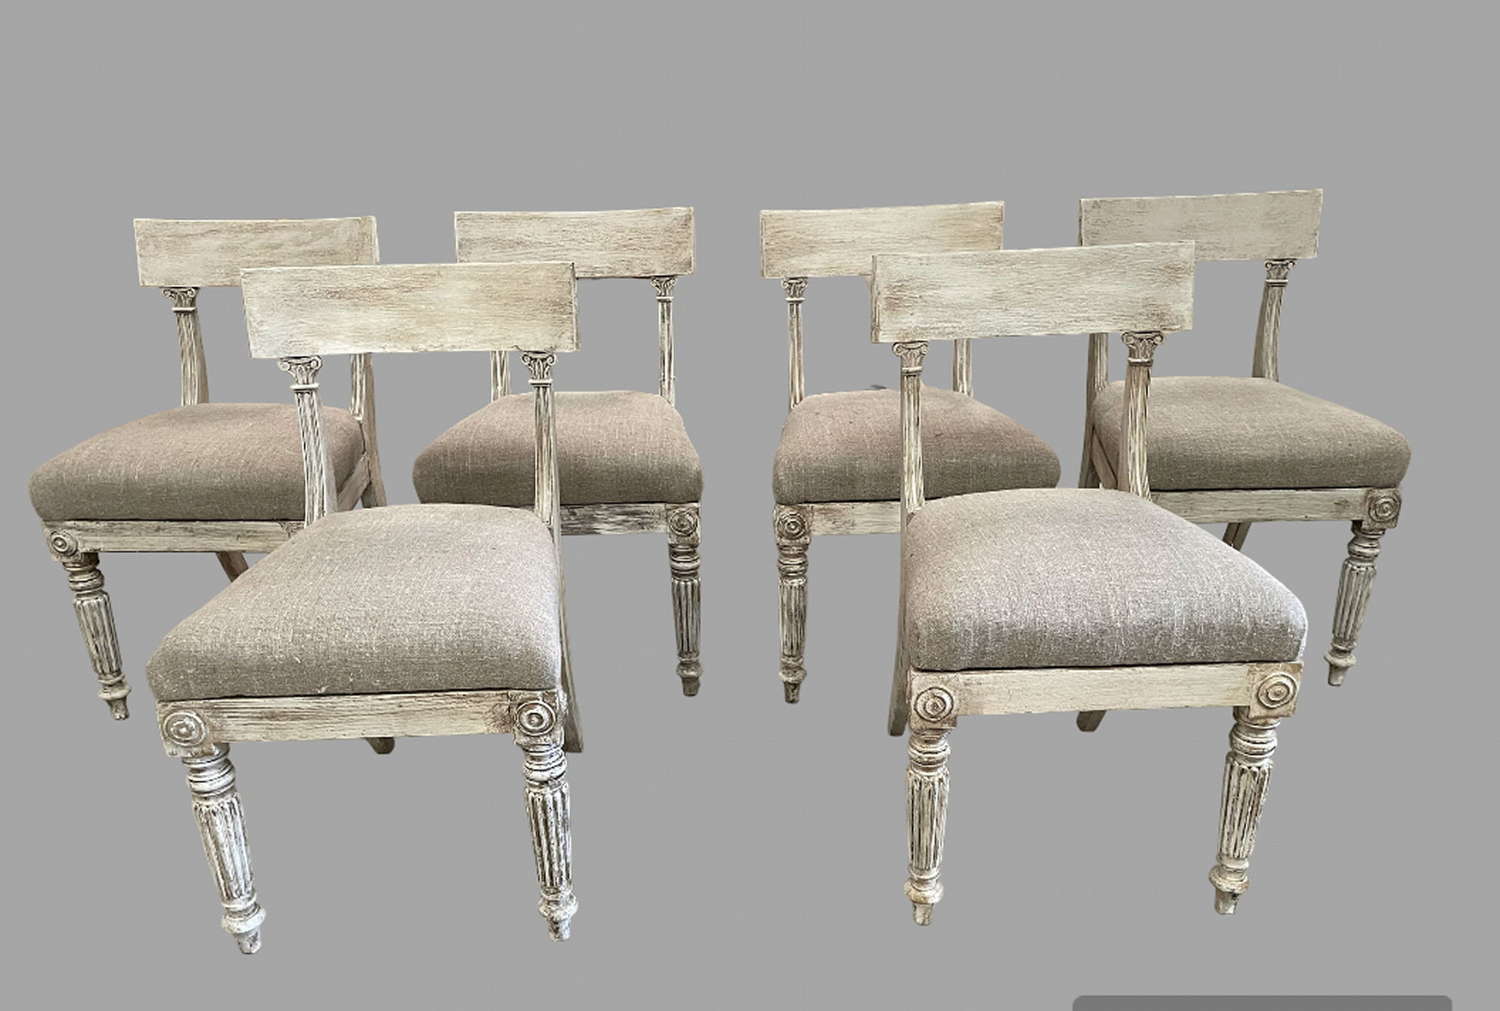 A Set of Six Bar Back Dining Chairs